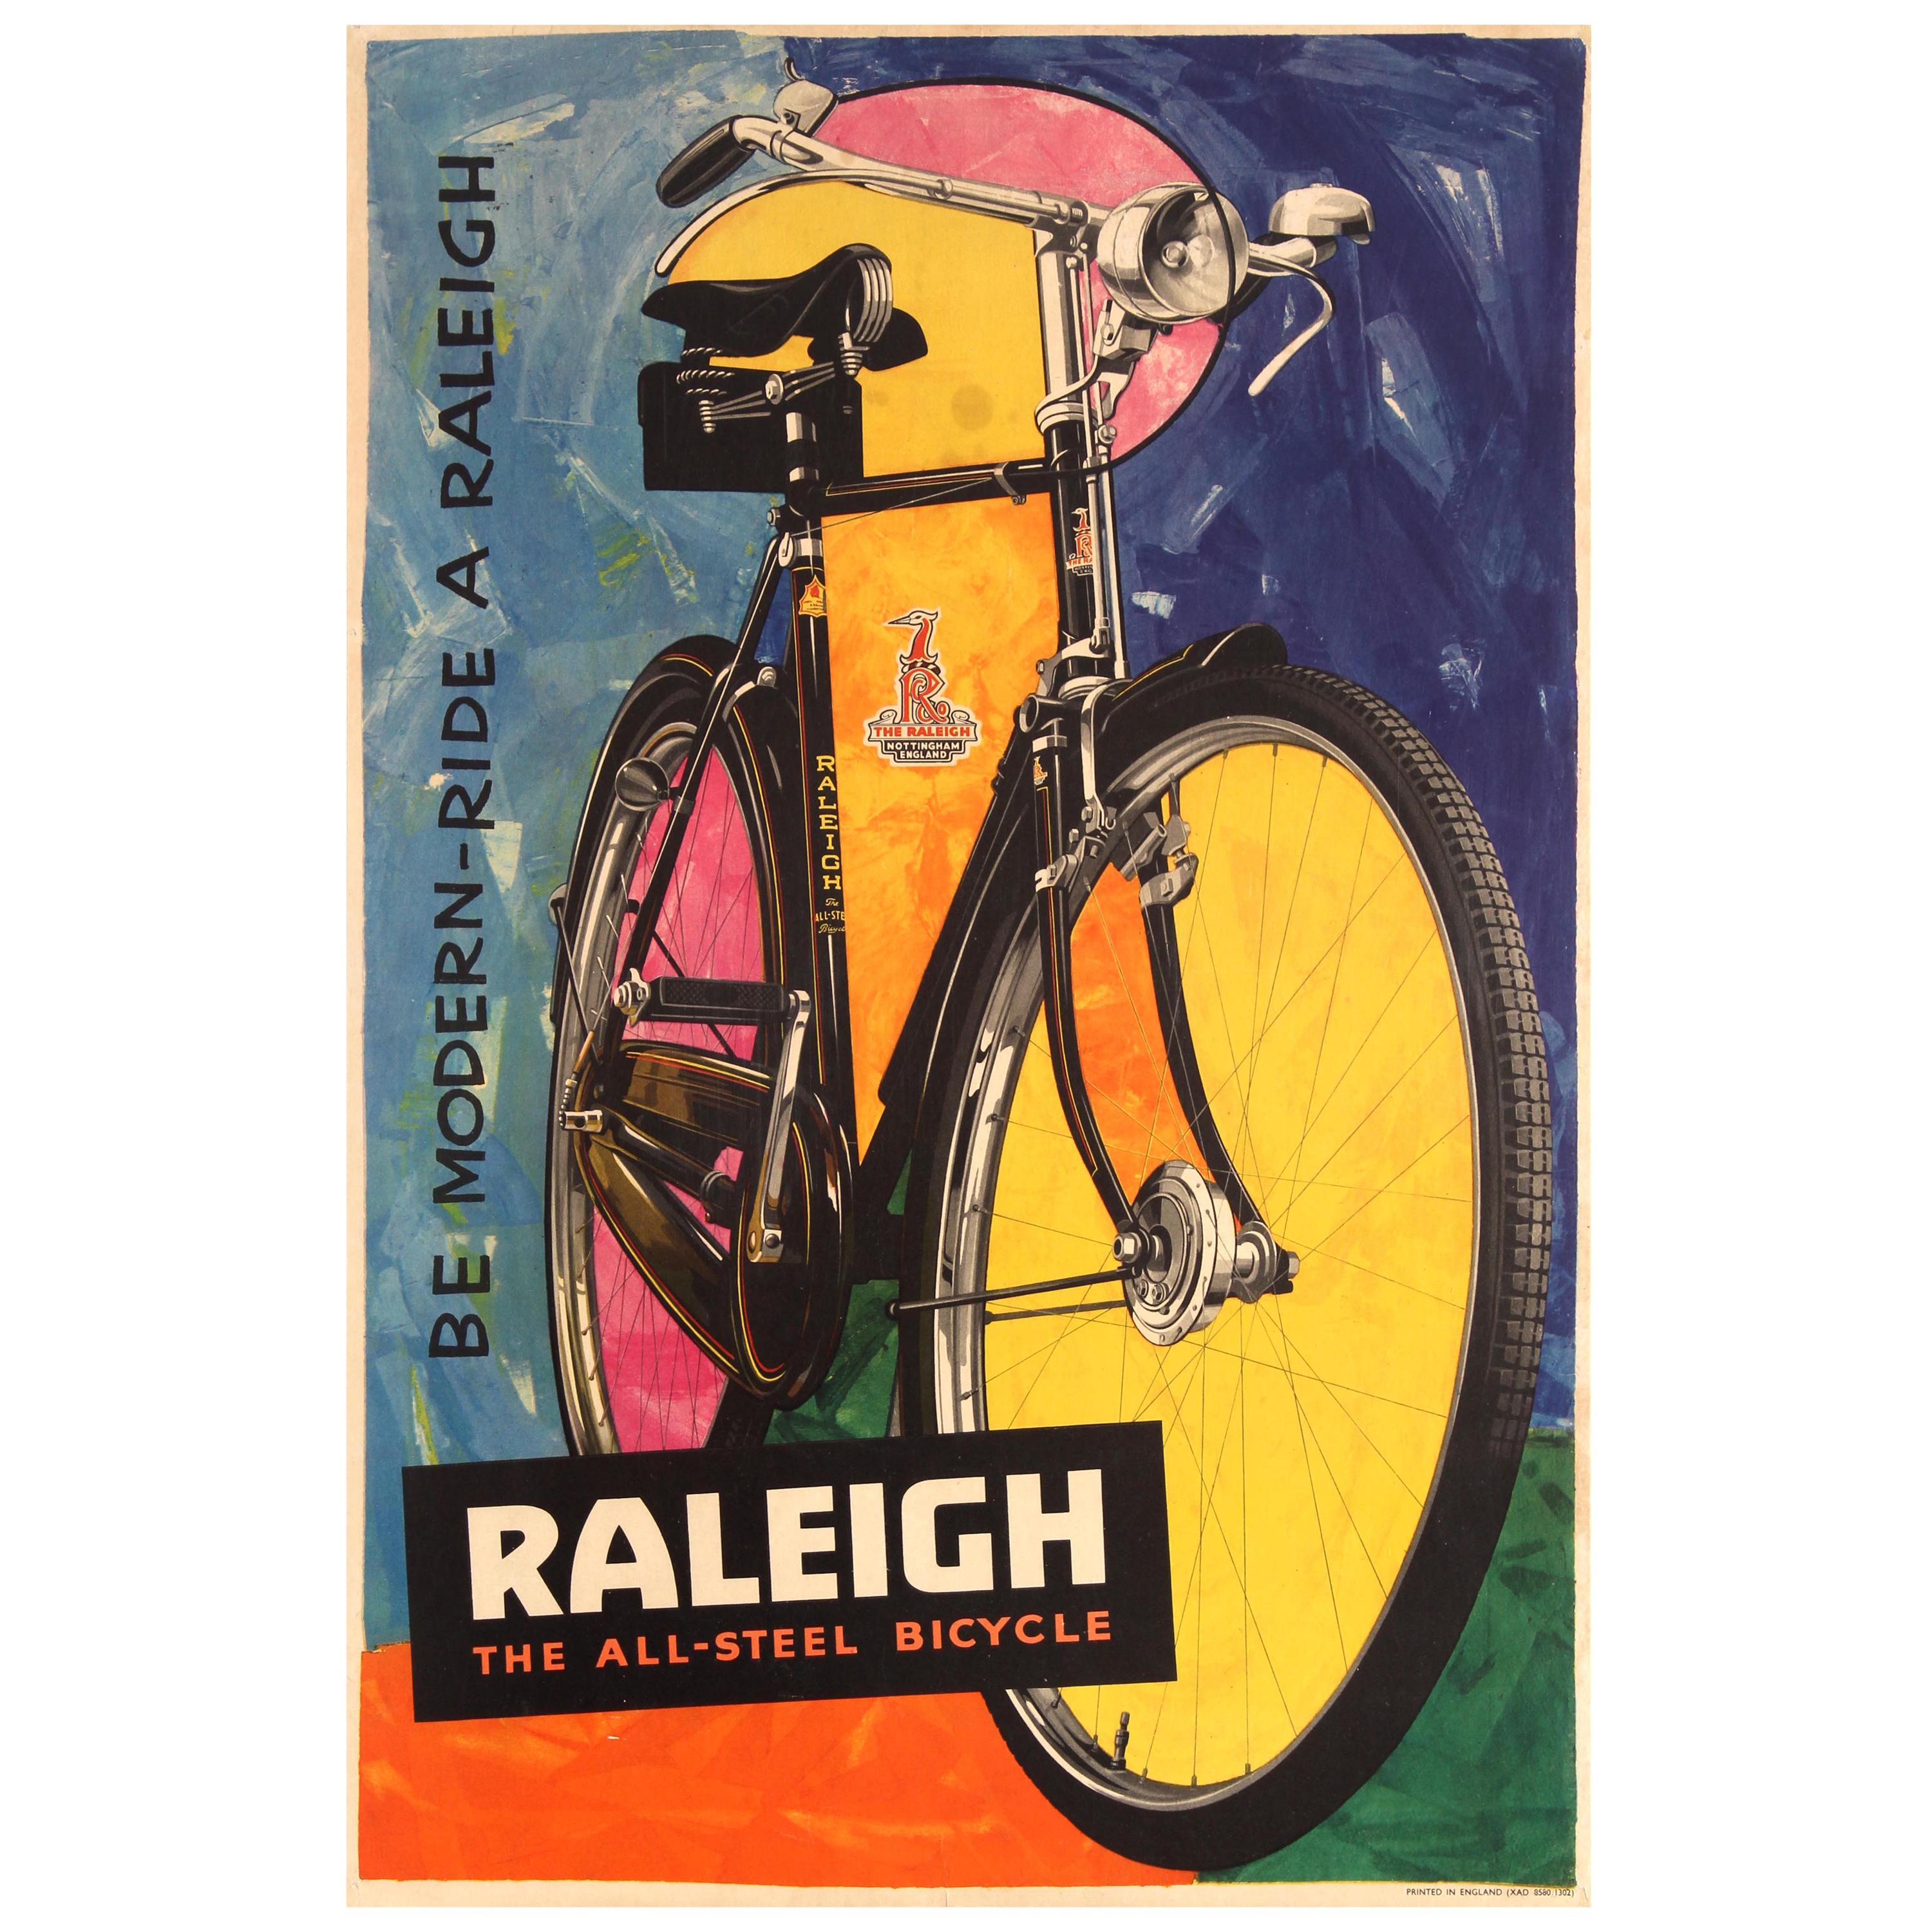 Original Vintage Bike Poster Be Modern Ride a Raleigh The All-Steel Bicycle Art